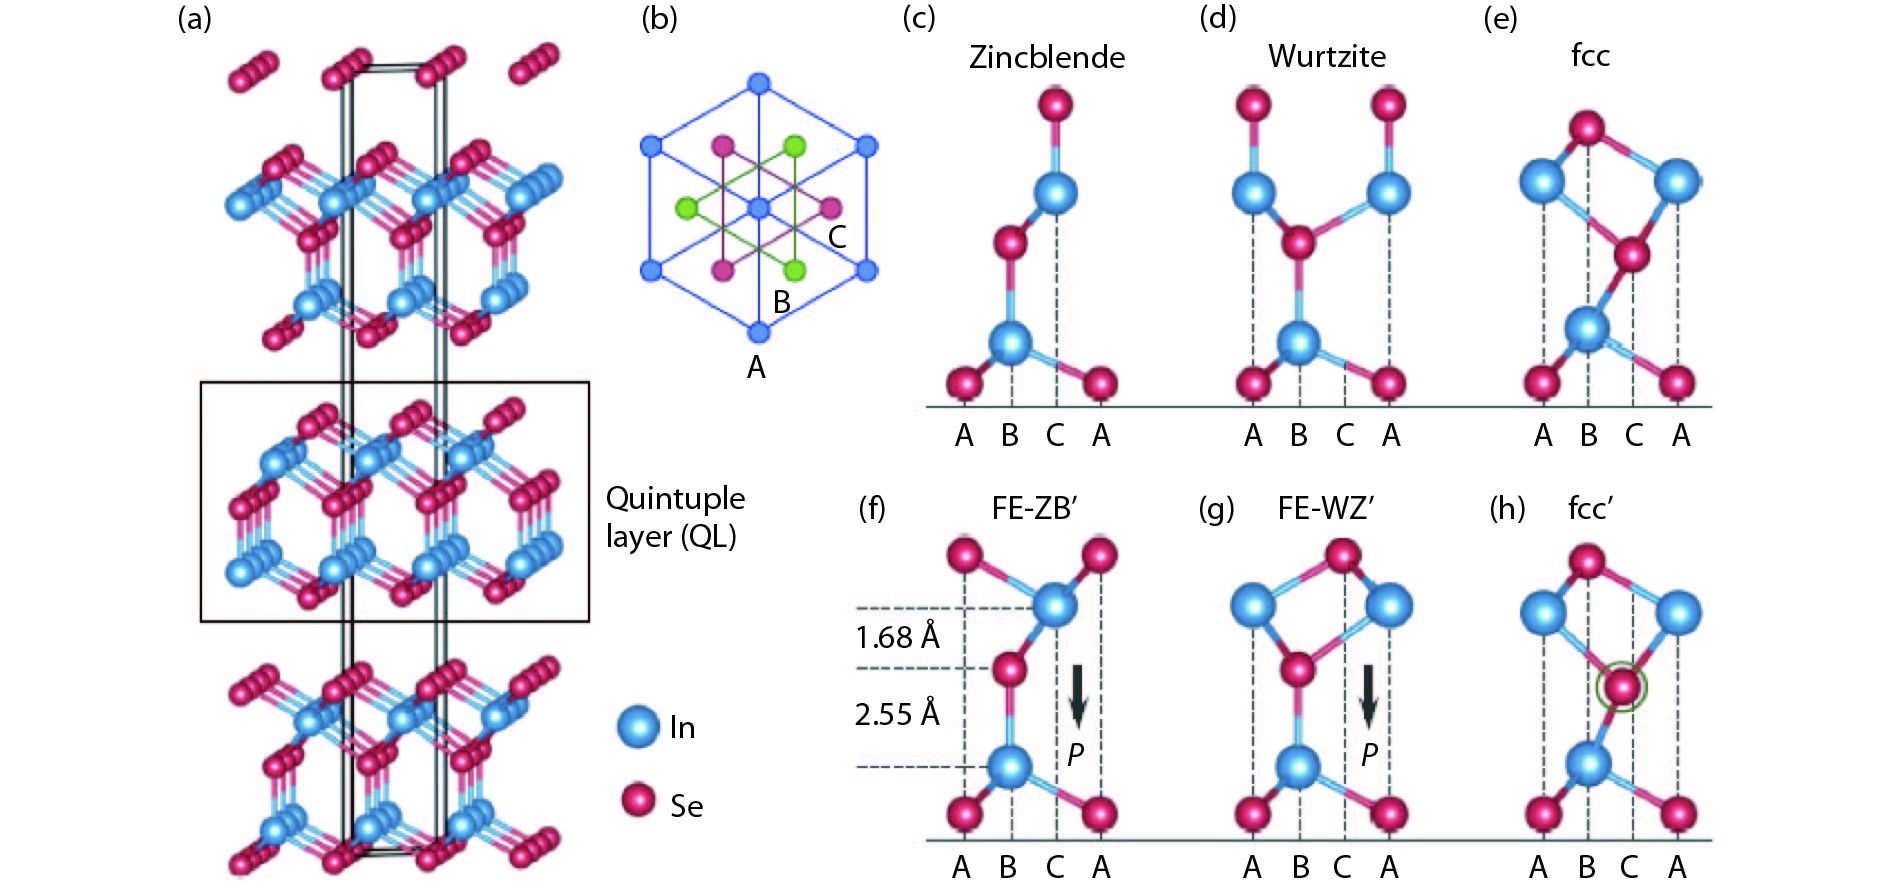 (Color online) Layered structures of In2Se3. (a) Three-dimensional crystal structure of layered In2Se3, with the In atoms in blue and Se atoms in red, and a quintuple layer (QL) is indicated by the black dashed square. (b) Top view of the system along the vertical direction. Each atomic layer in a QL contains only one elemental species, with the atoms arranged in one of the triangular lattices A, B or C as illustrated. (c–h) Side views of several representative structures of one QL In2Se3, among which the (c) to (e) structures are derived from the zincblende, wurtzite and fcc crystals, respectively. In (f), the interlayer spacings between the central Se layer and the two neighboring In layers are displayed. The black arrows in (f) and (g) indicate the directions of the spontaneous electric polarization (P) in the FE-ZB' and FE-WZ' structures, respectively. The FE-ZB’ and FE-WZ’ structures in (f) and (g) are identified as α phase, while the metastable structure fcc and fcc’ in (e) and (h) are identified as β phase. (Courtesy of Ref. [20])